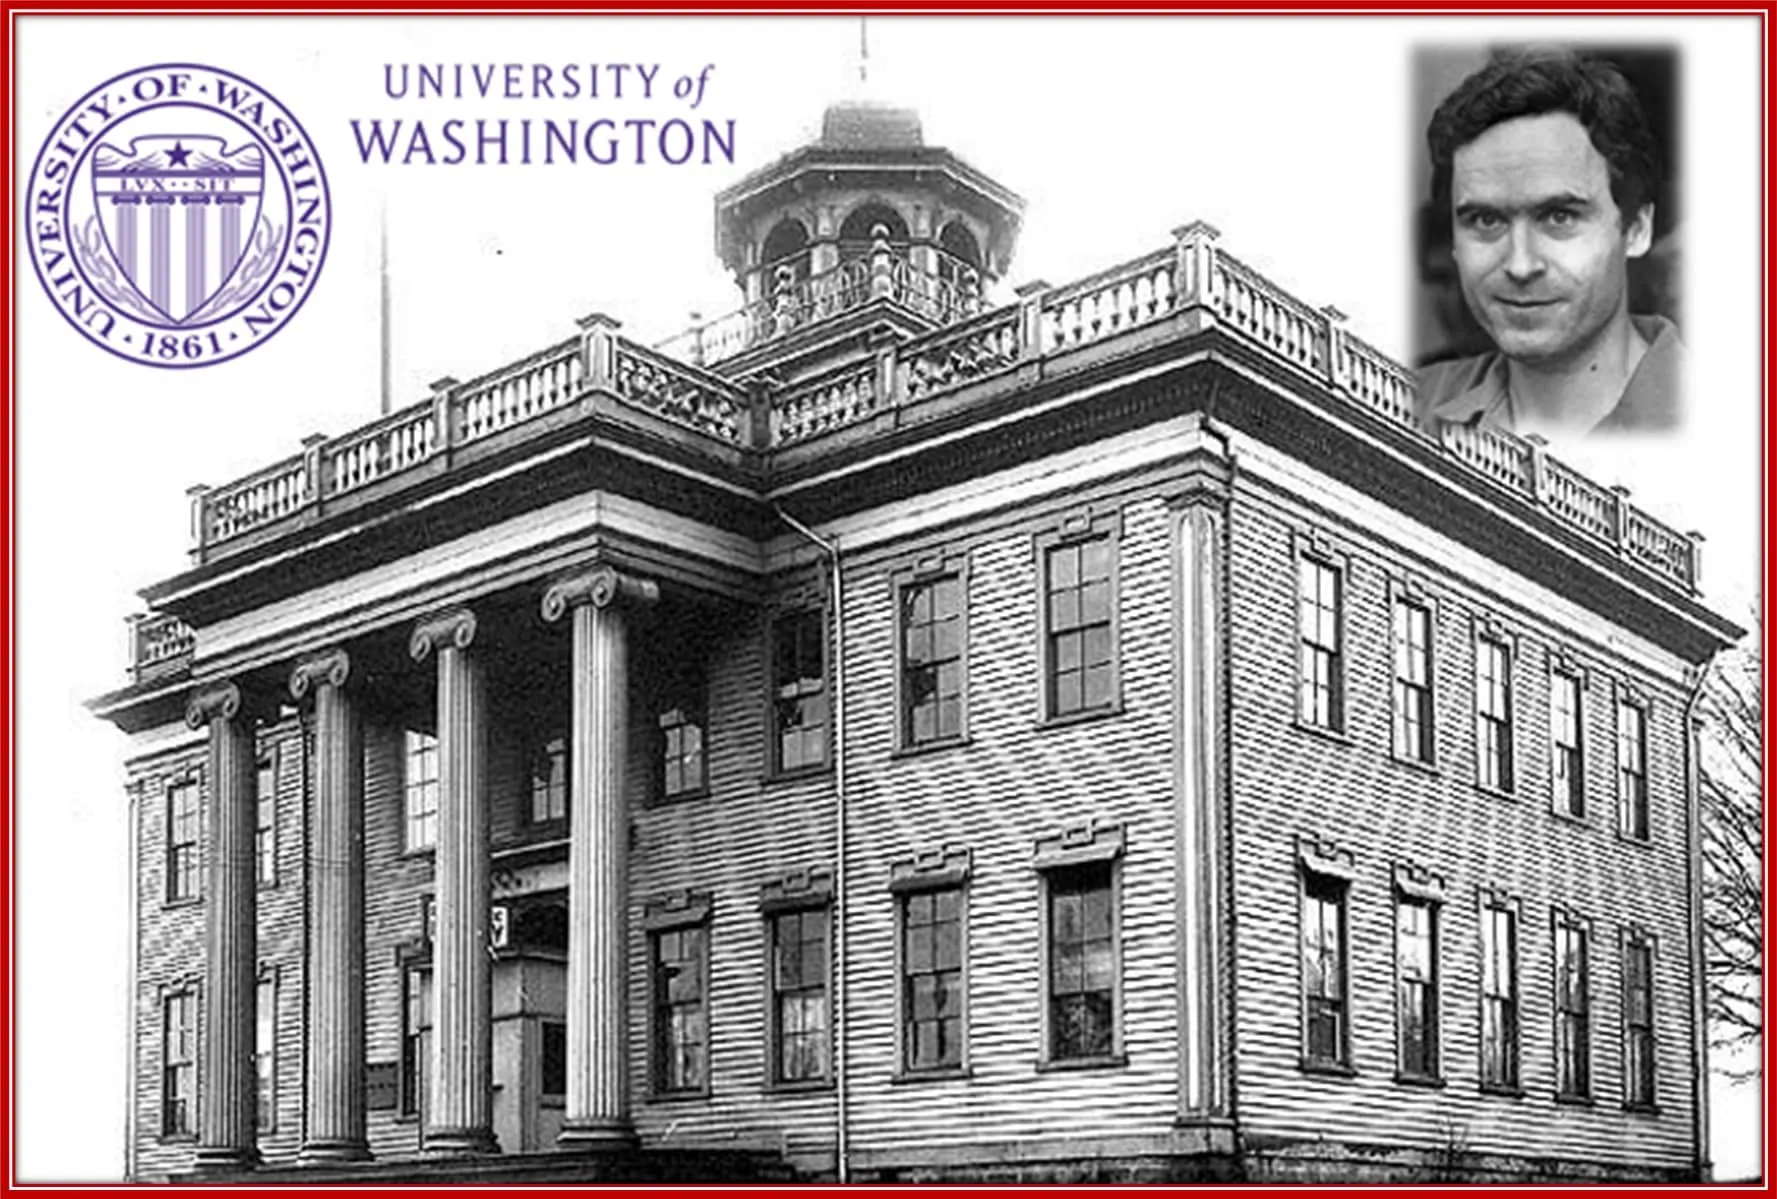 Ted Bundy finished from the University of Washington with a degree in psychology in 1972.